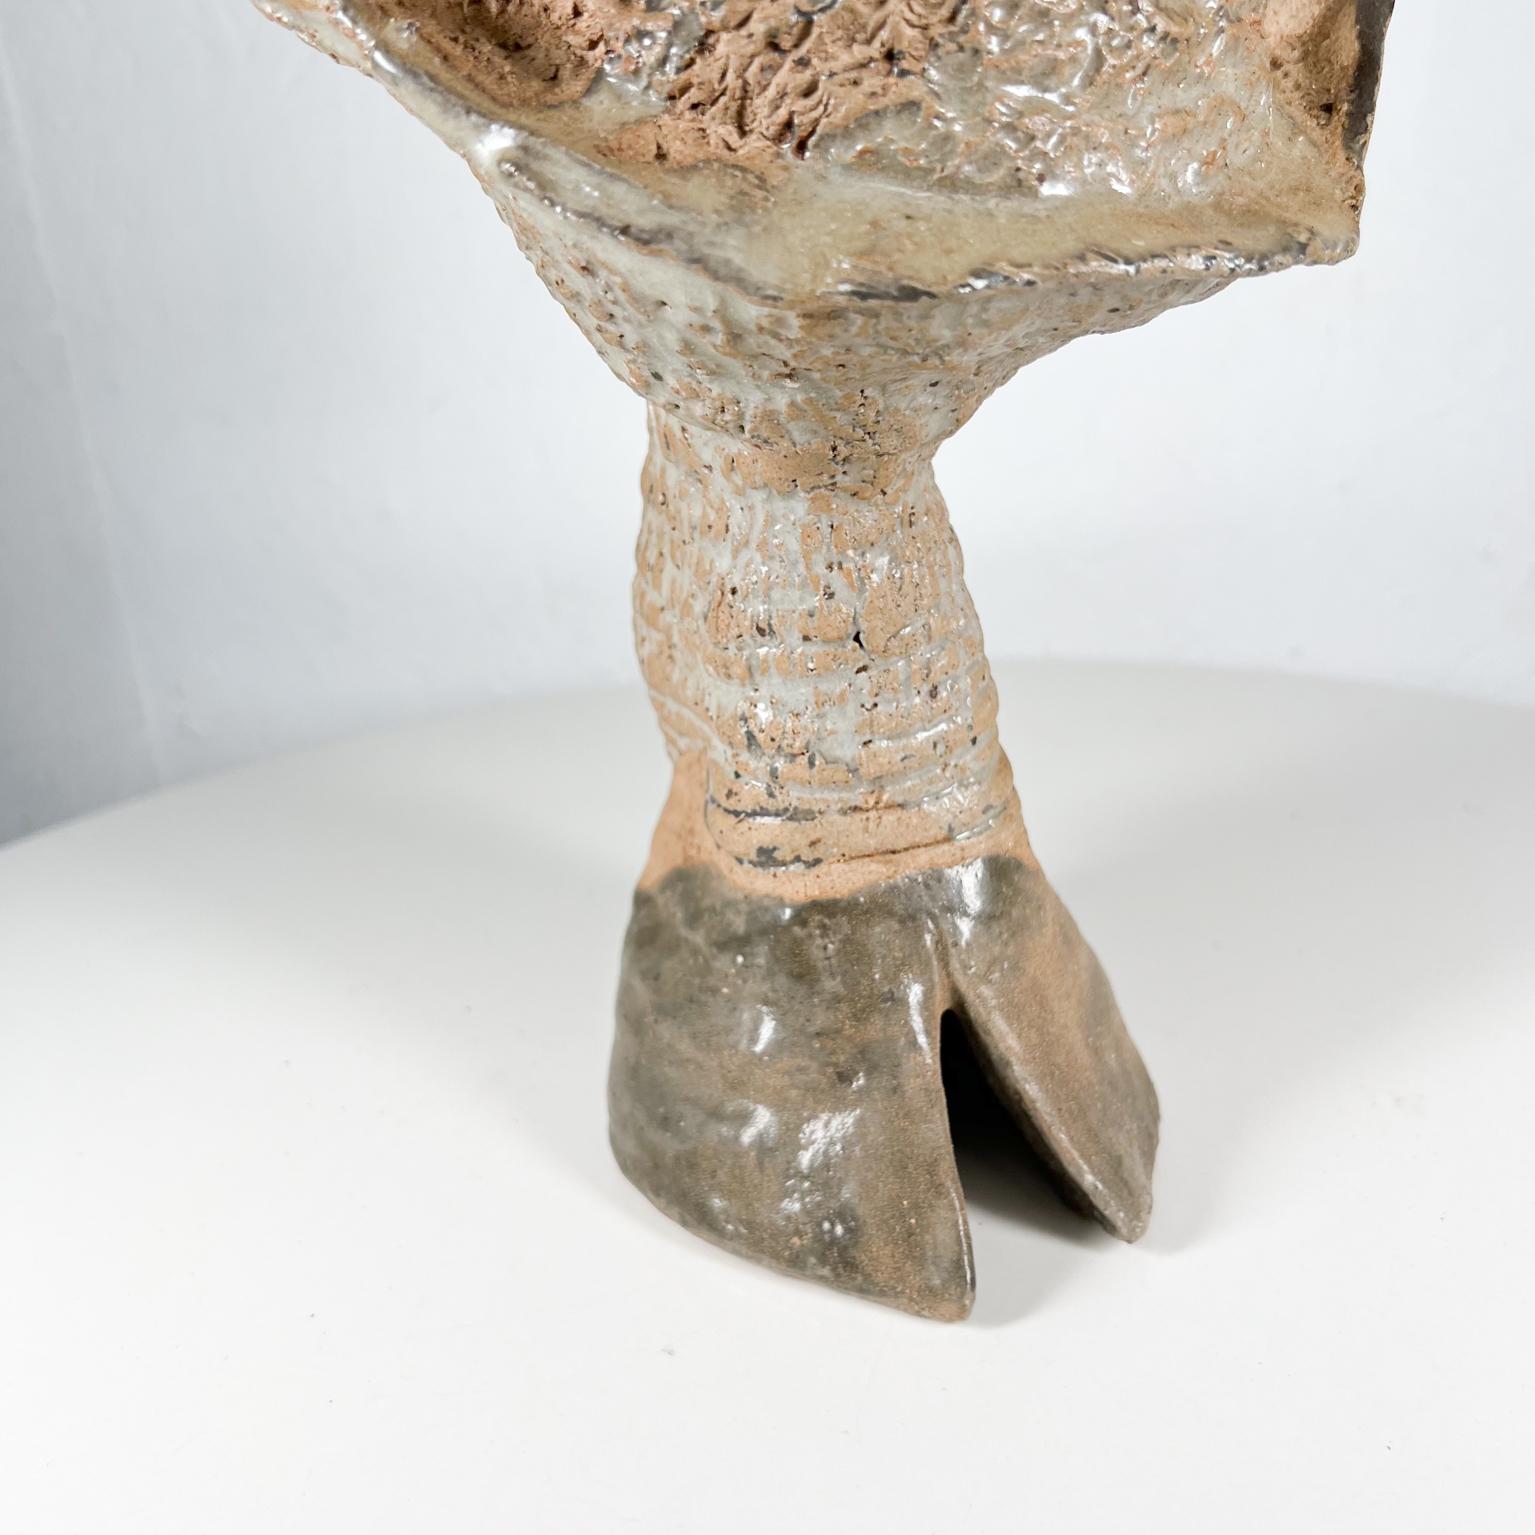 Organic Art Vintage Modern Pottery Textured Abstract Hoof Sculpture For Sale 5